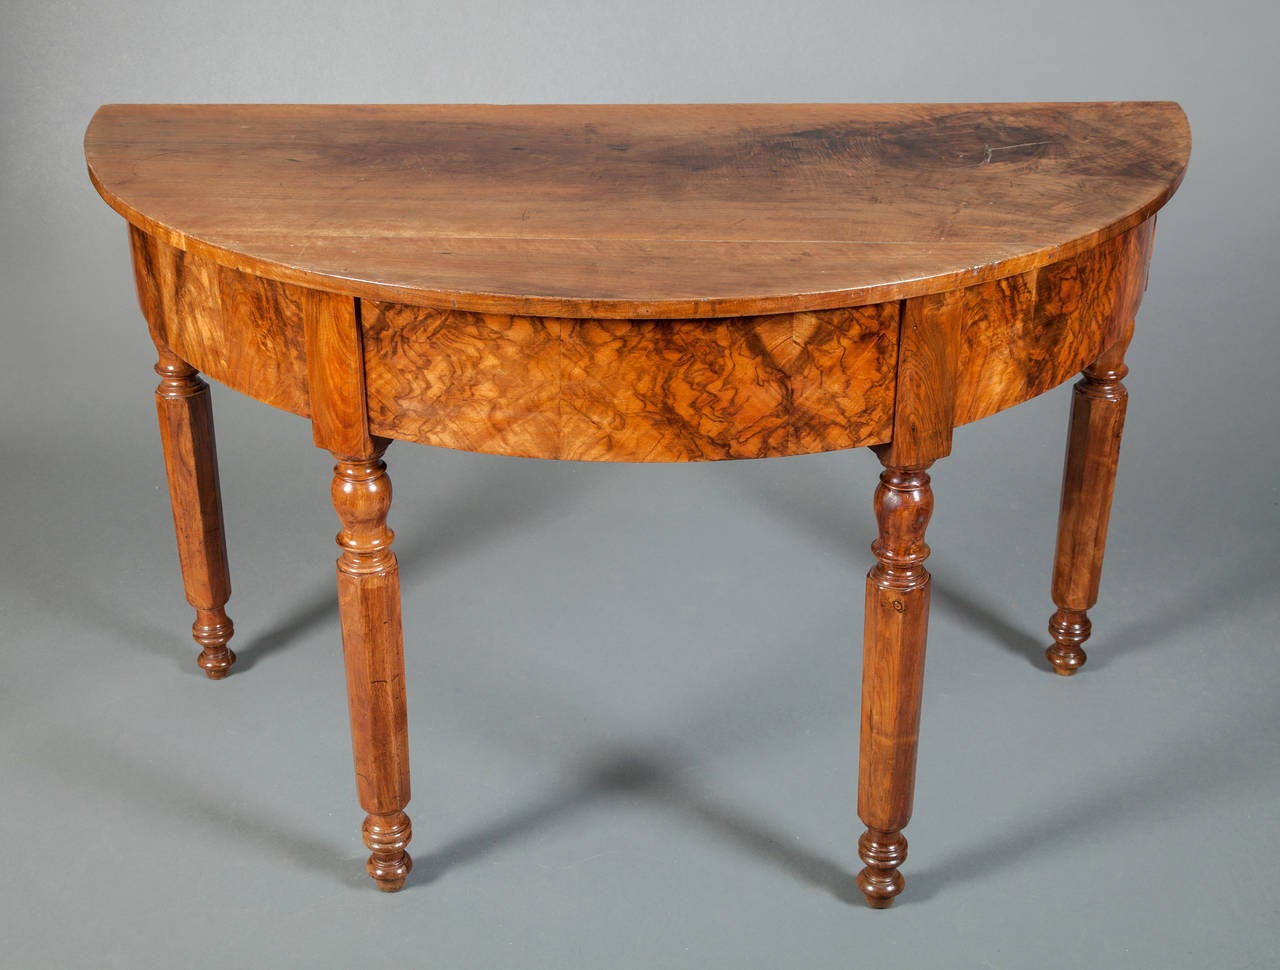 Demilune Tables Used With Dining Room Tables